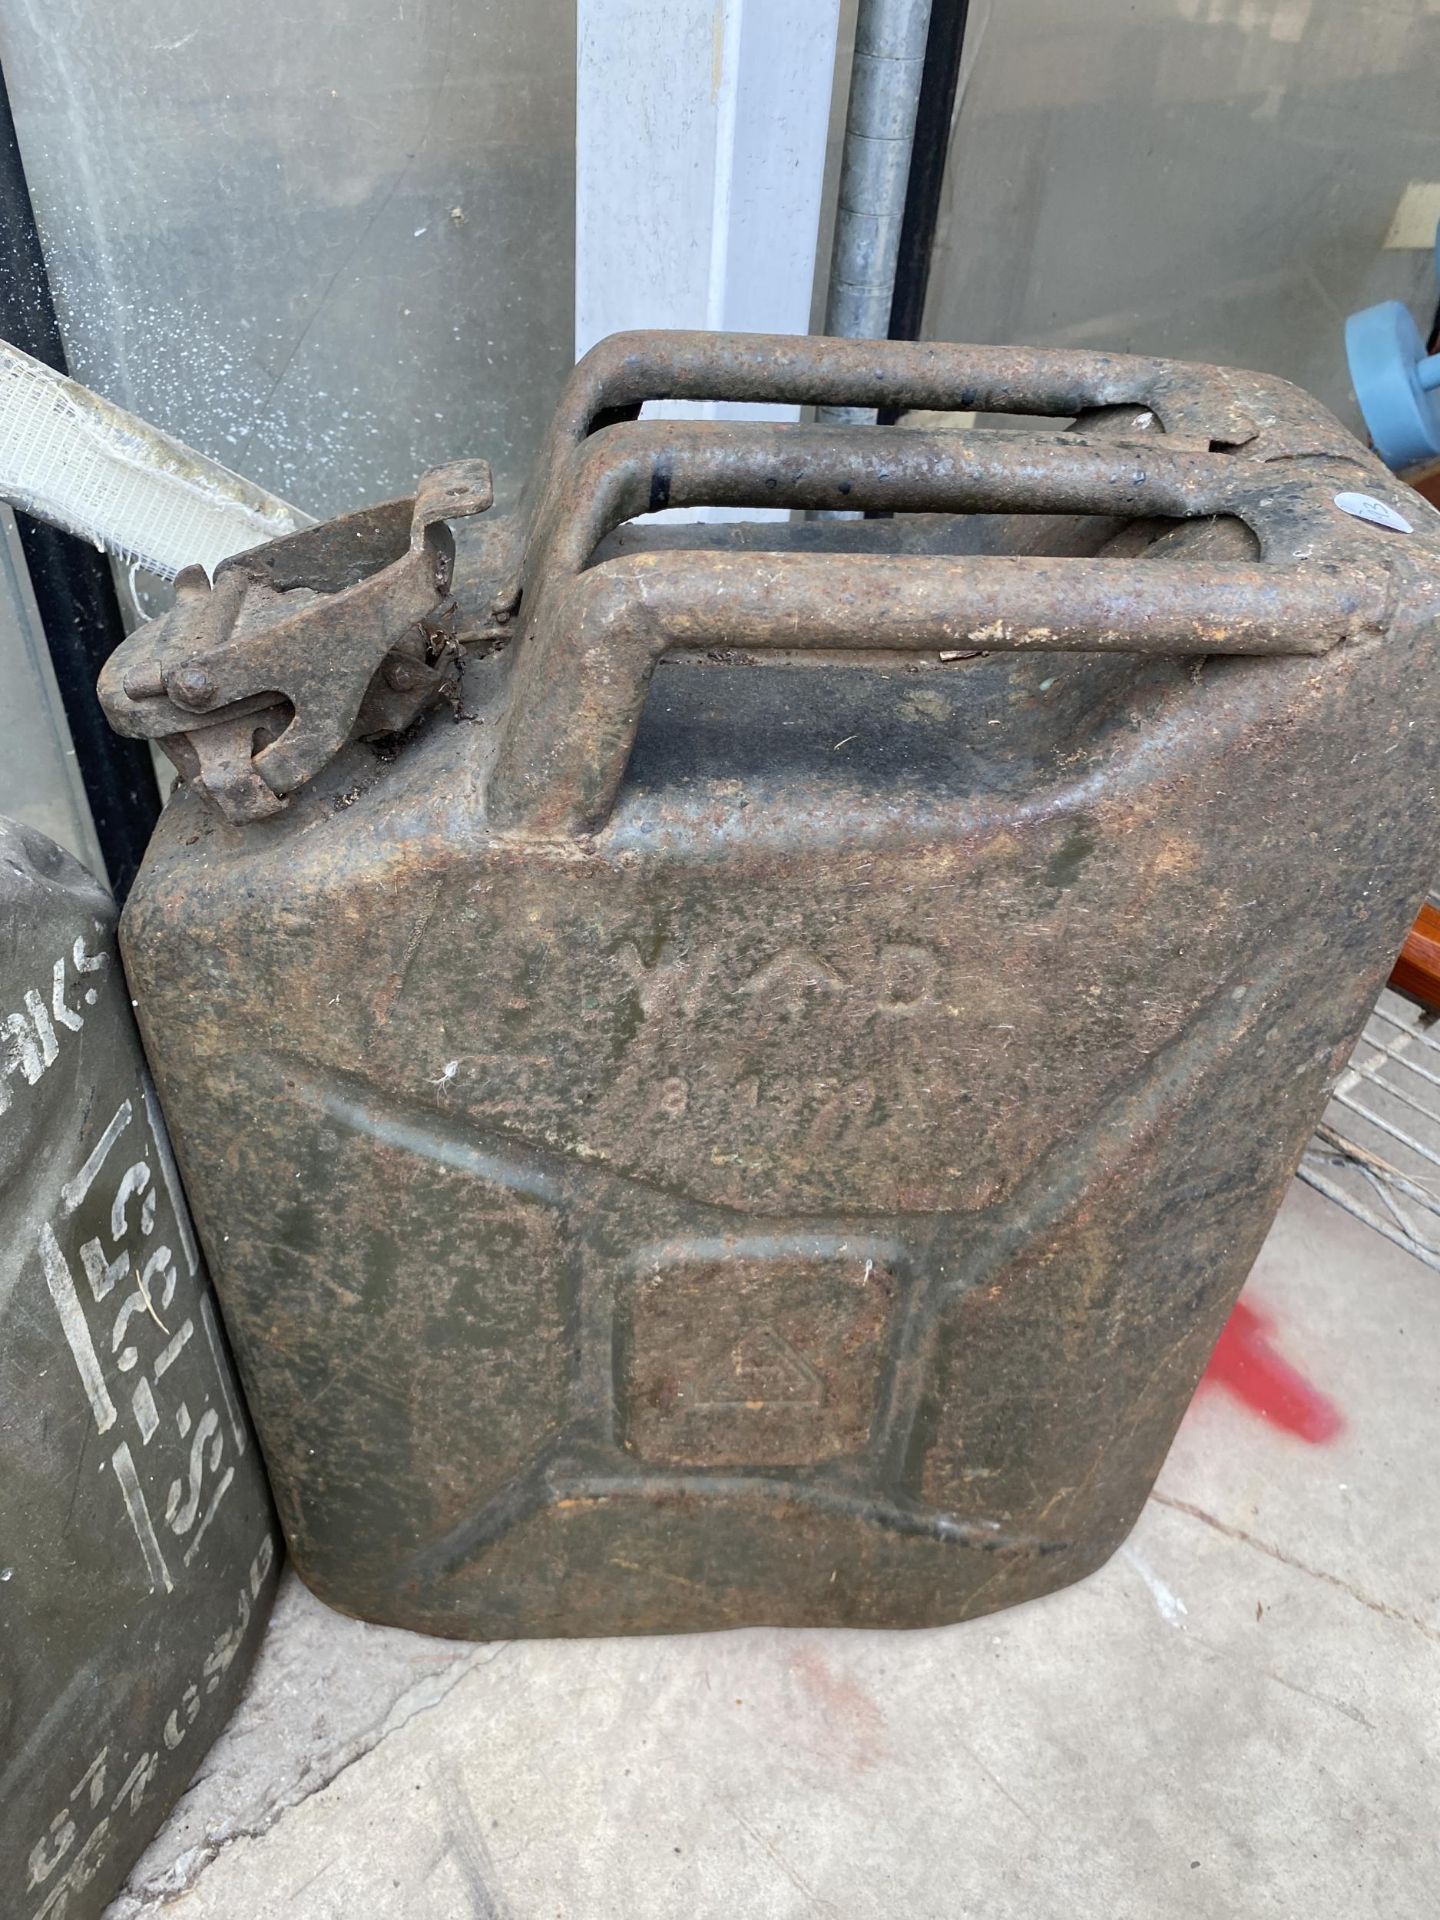 THREE METAL JERRY CANS AND A VINTAGE 'SPUR' FUEL CAN WITH BRASS CAP - Image 5 of 5